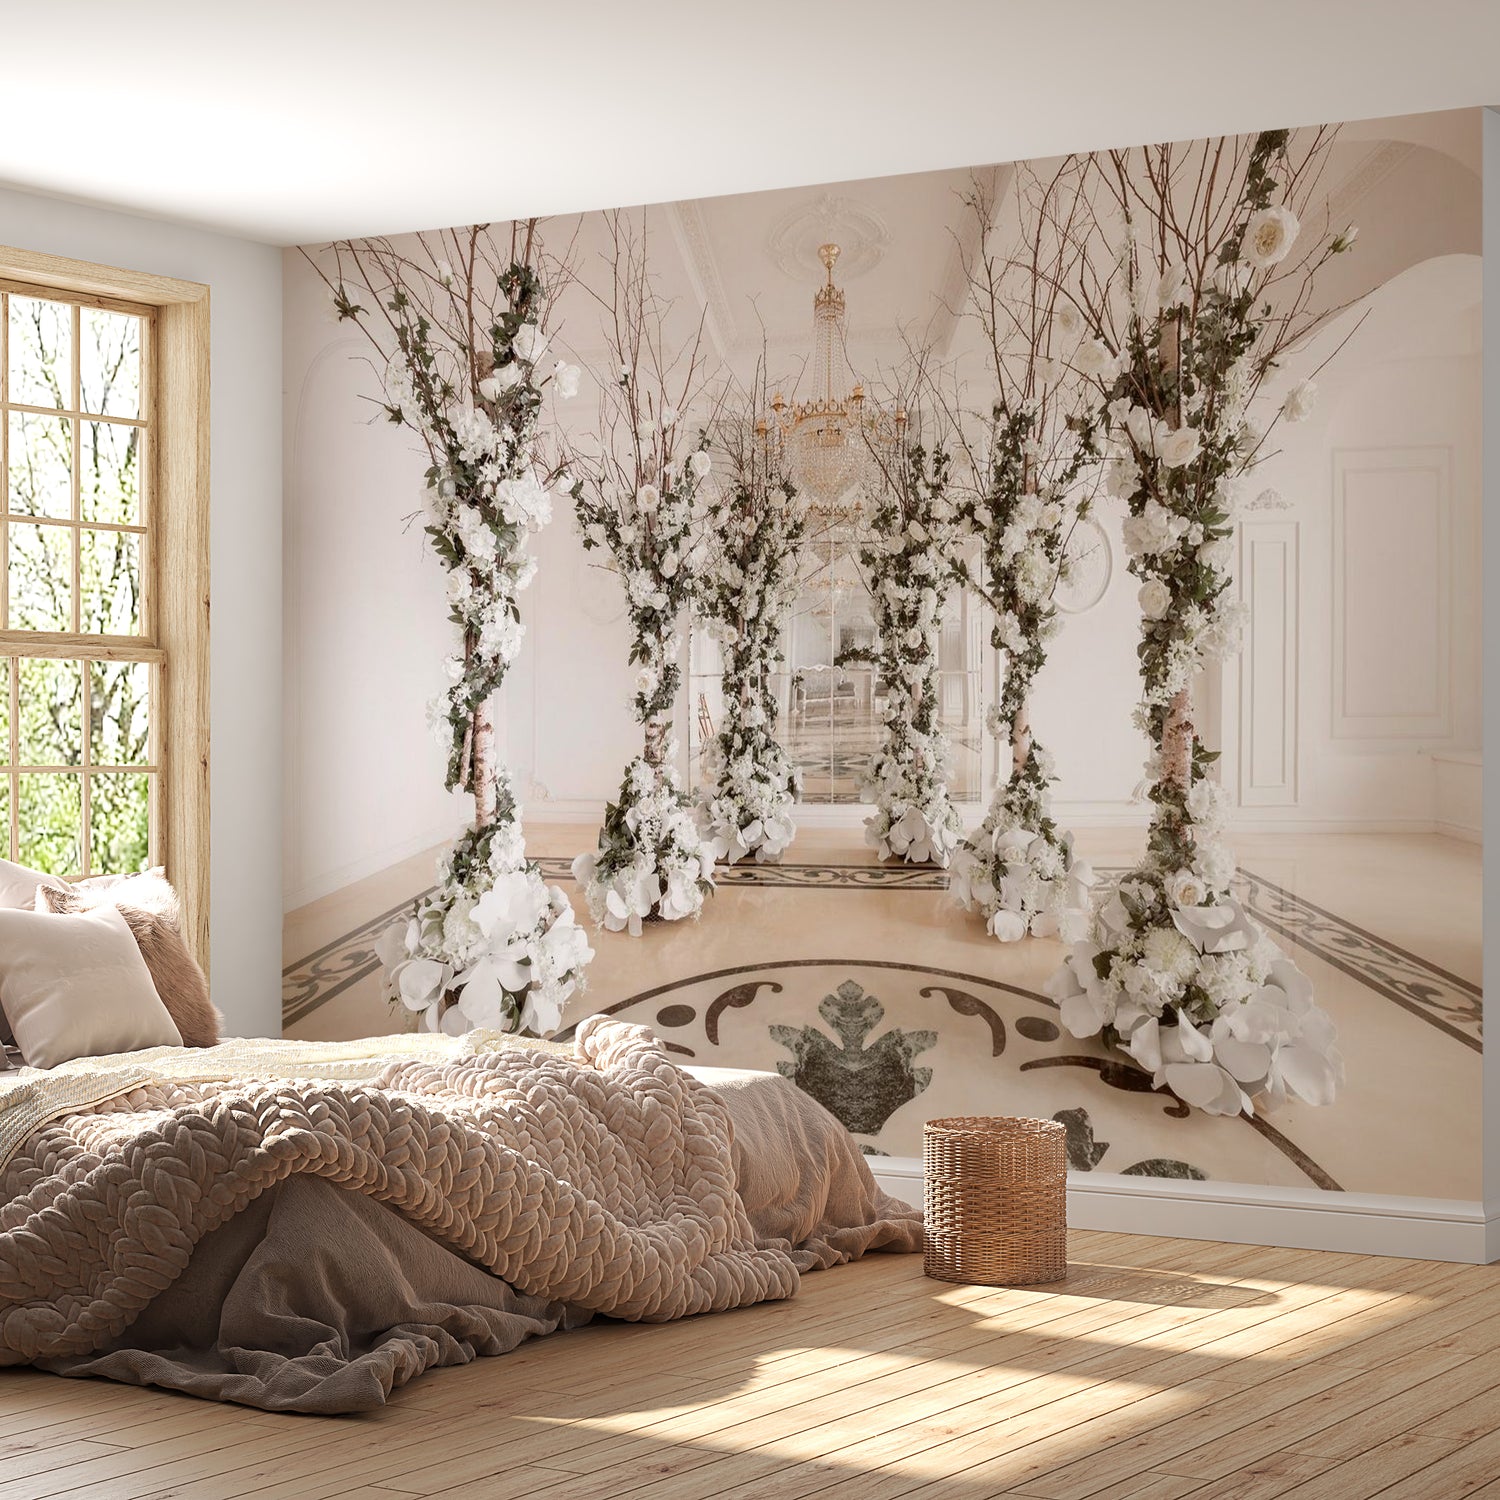 Peel & Stick 3D Illusion Wall Mural - Flower Chamber - Removable Wall Decals